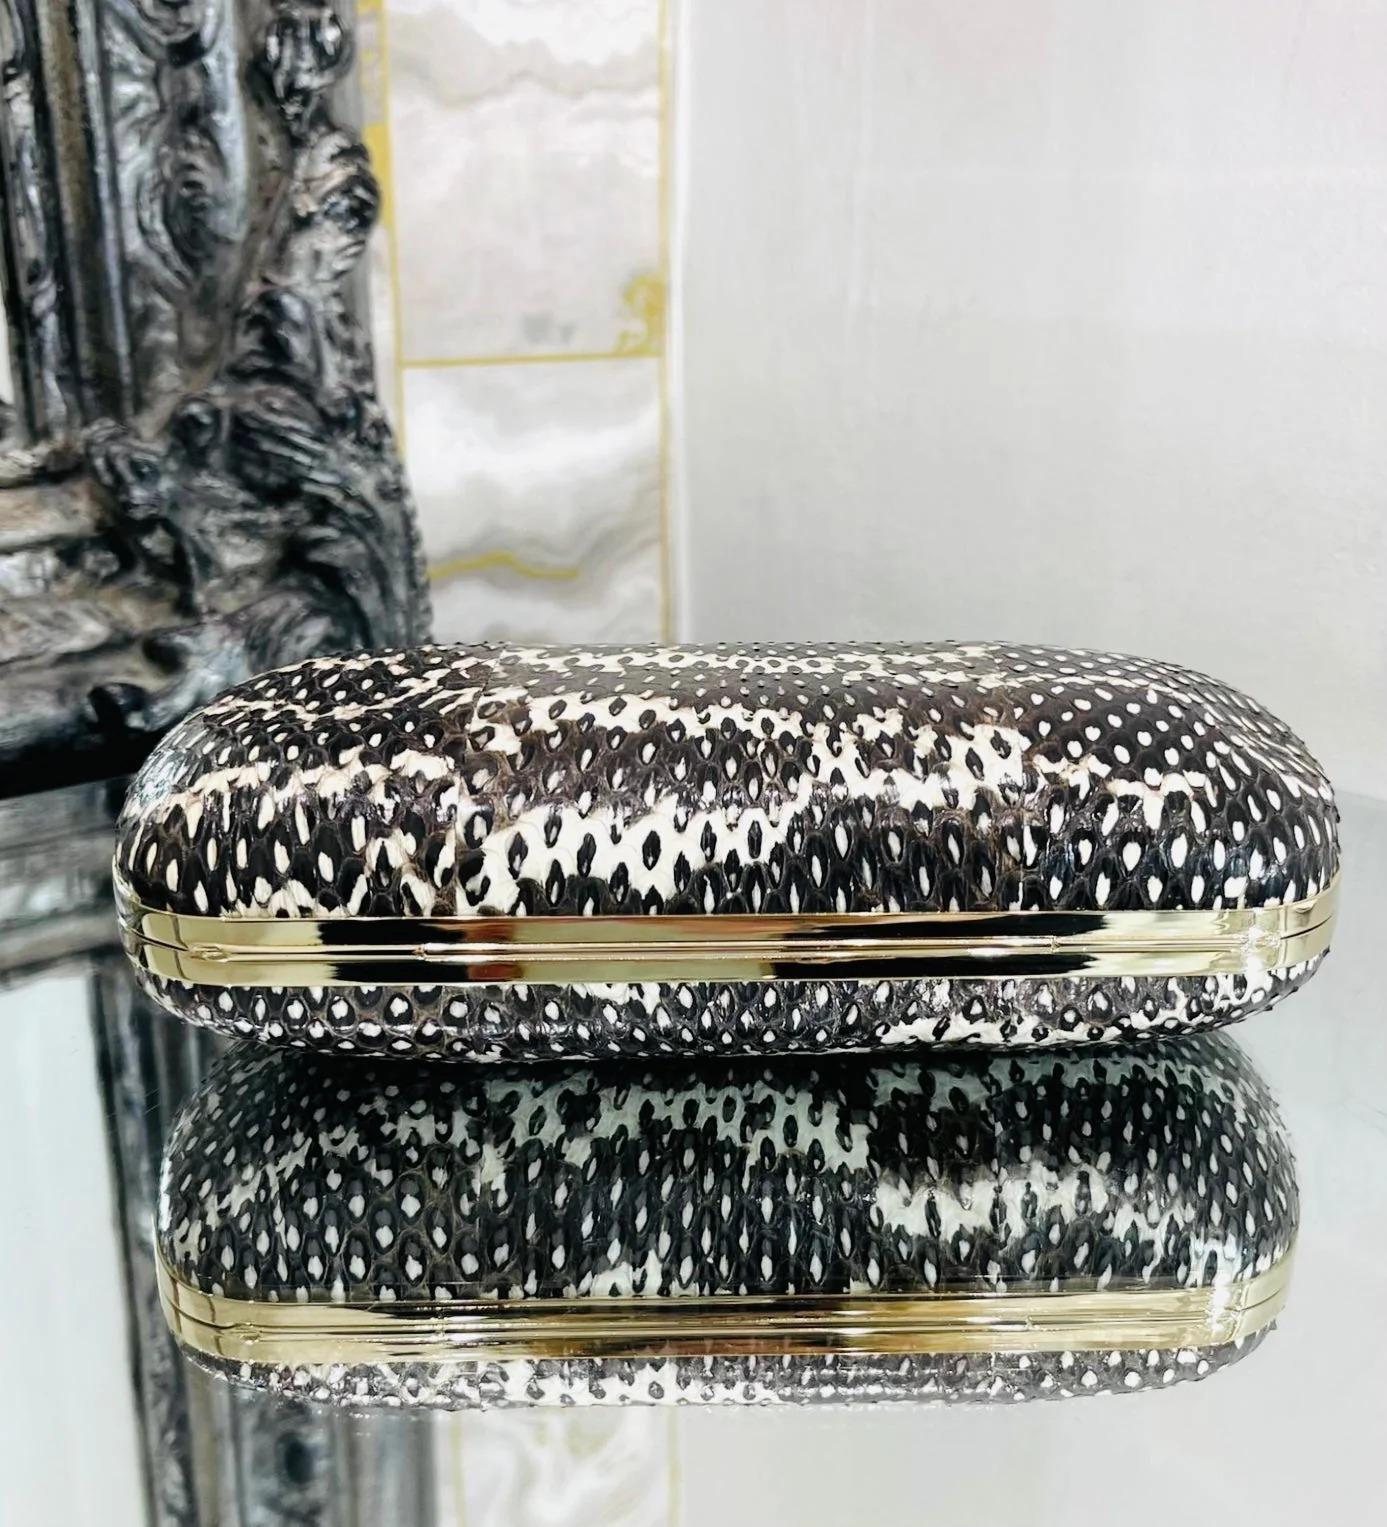 Sergio Rossi Lizard Skin Clutch Bag With Chain In Excellent Condition For Sale In London, GB